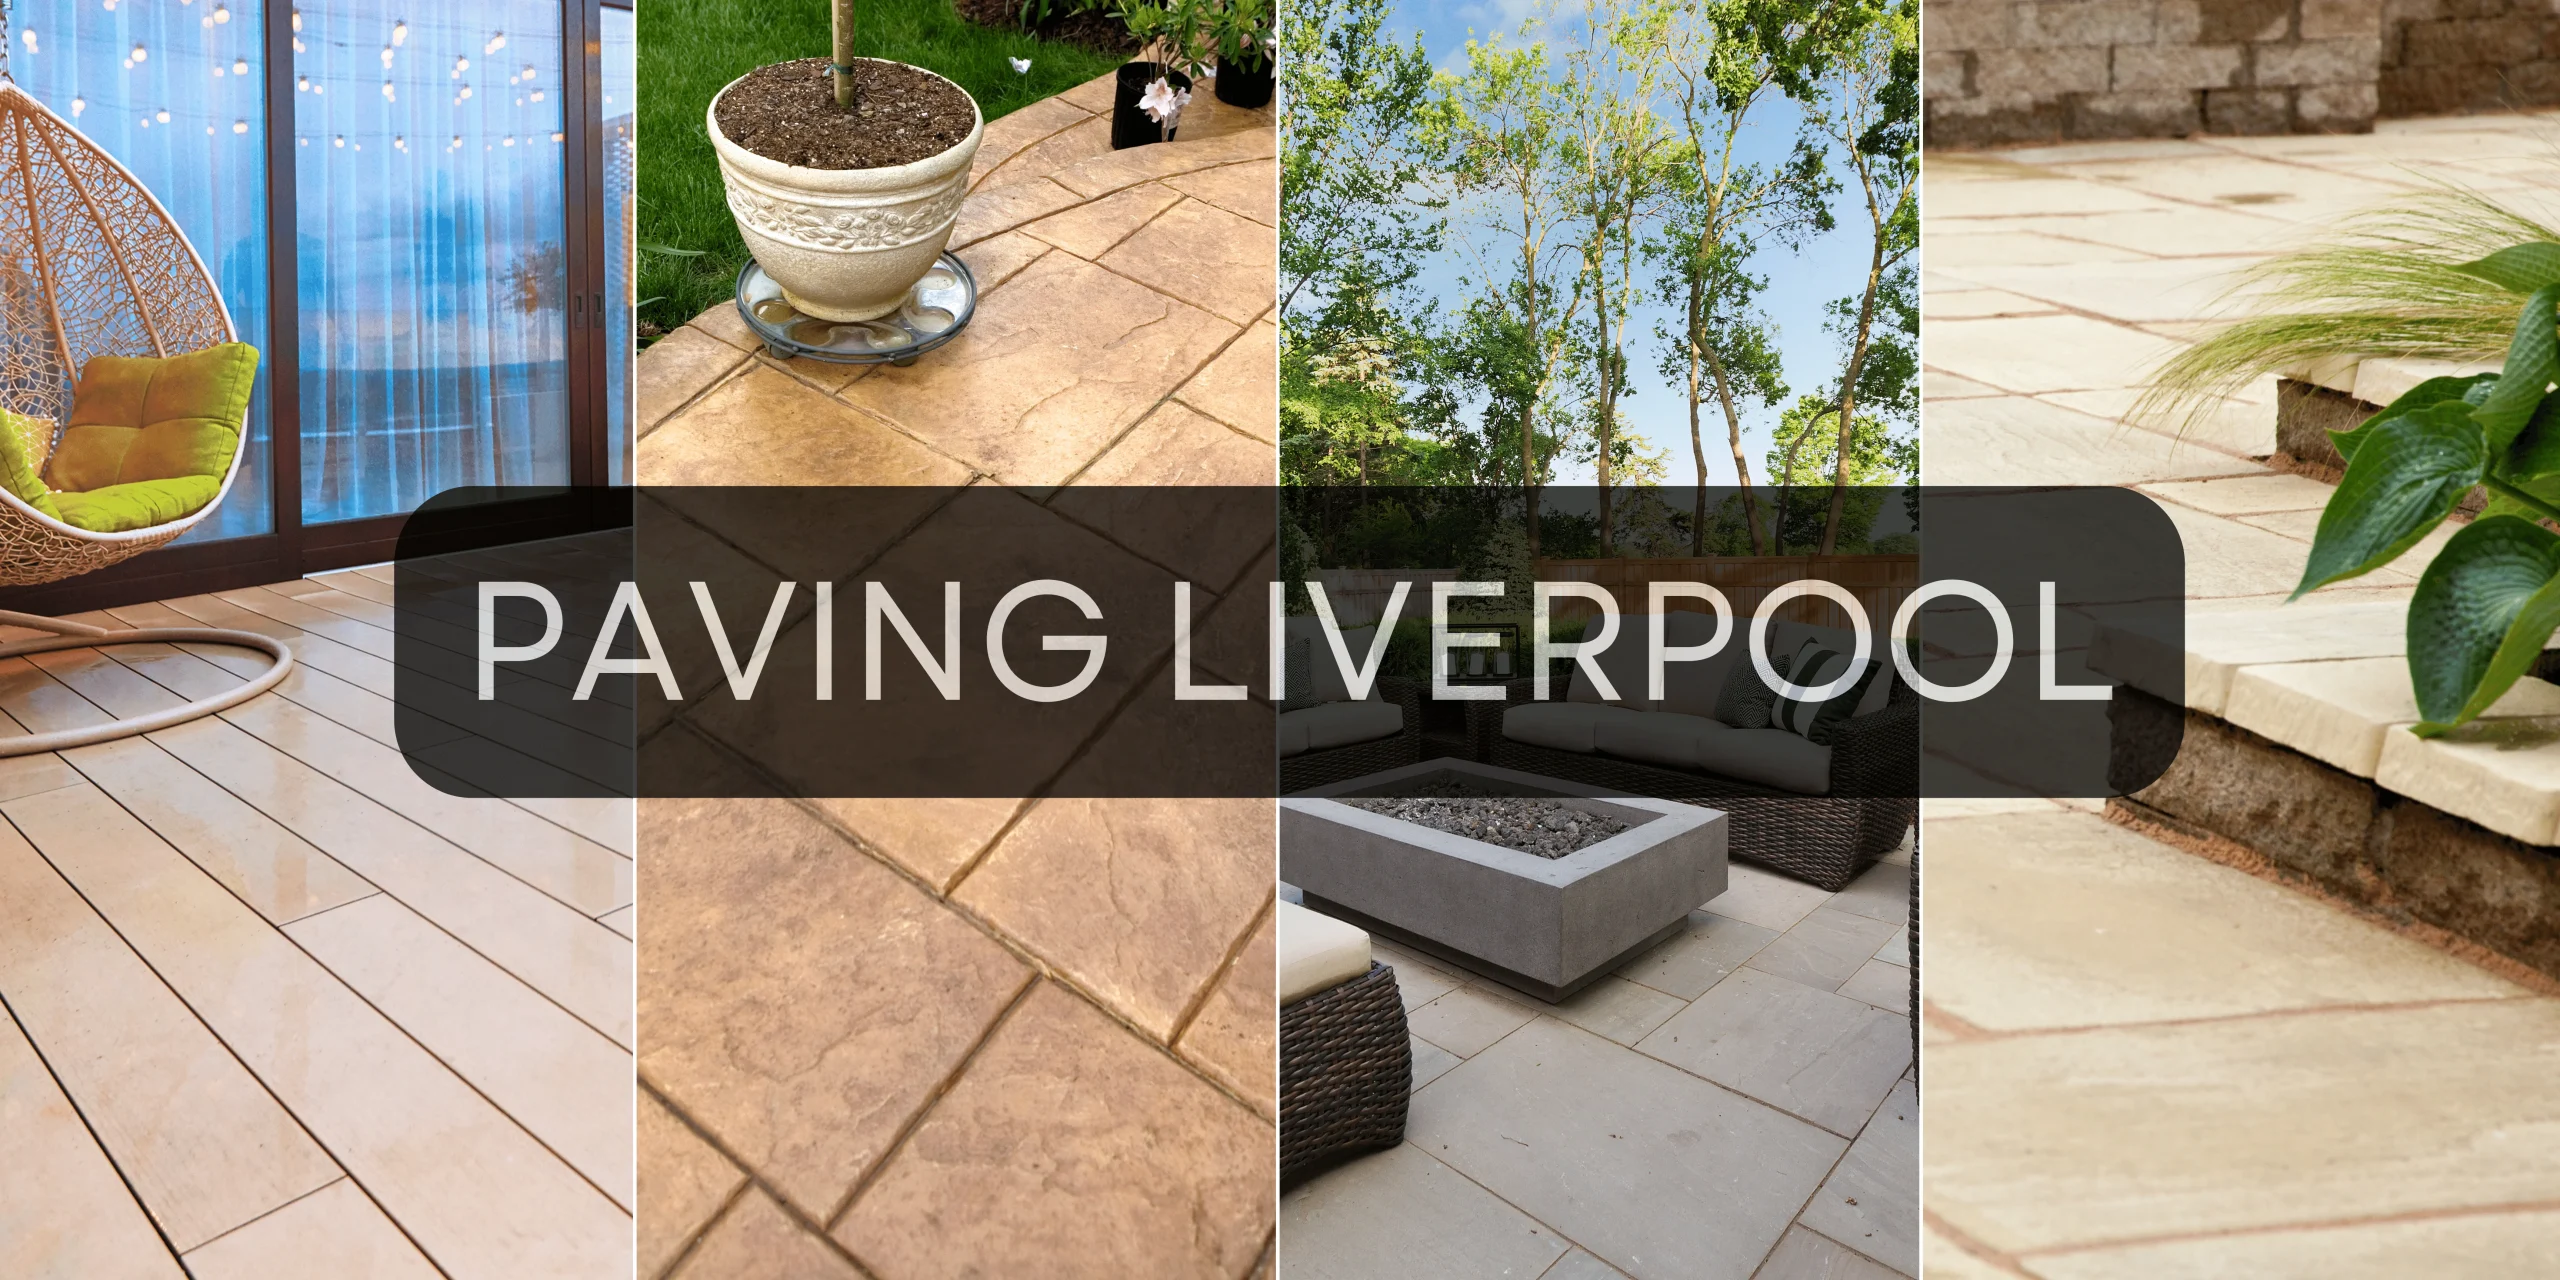 Paving Liverpool by UK Landscaping Services